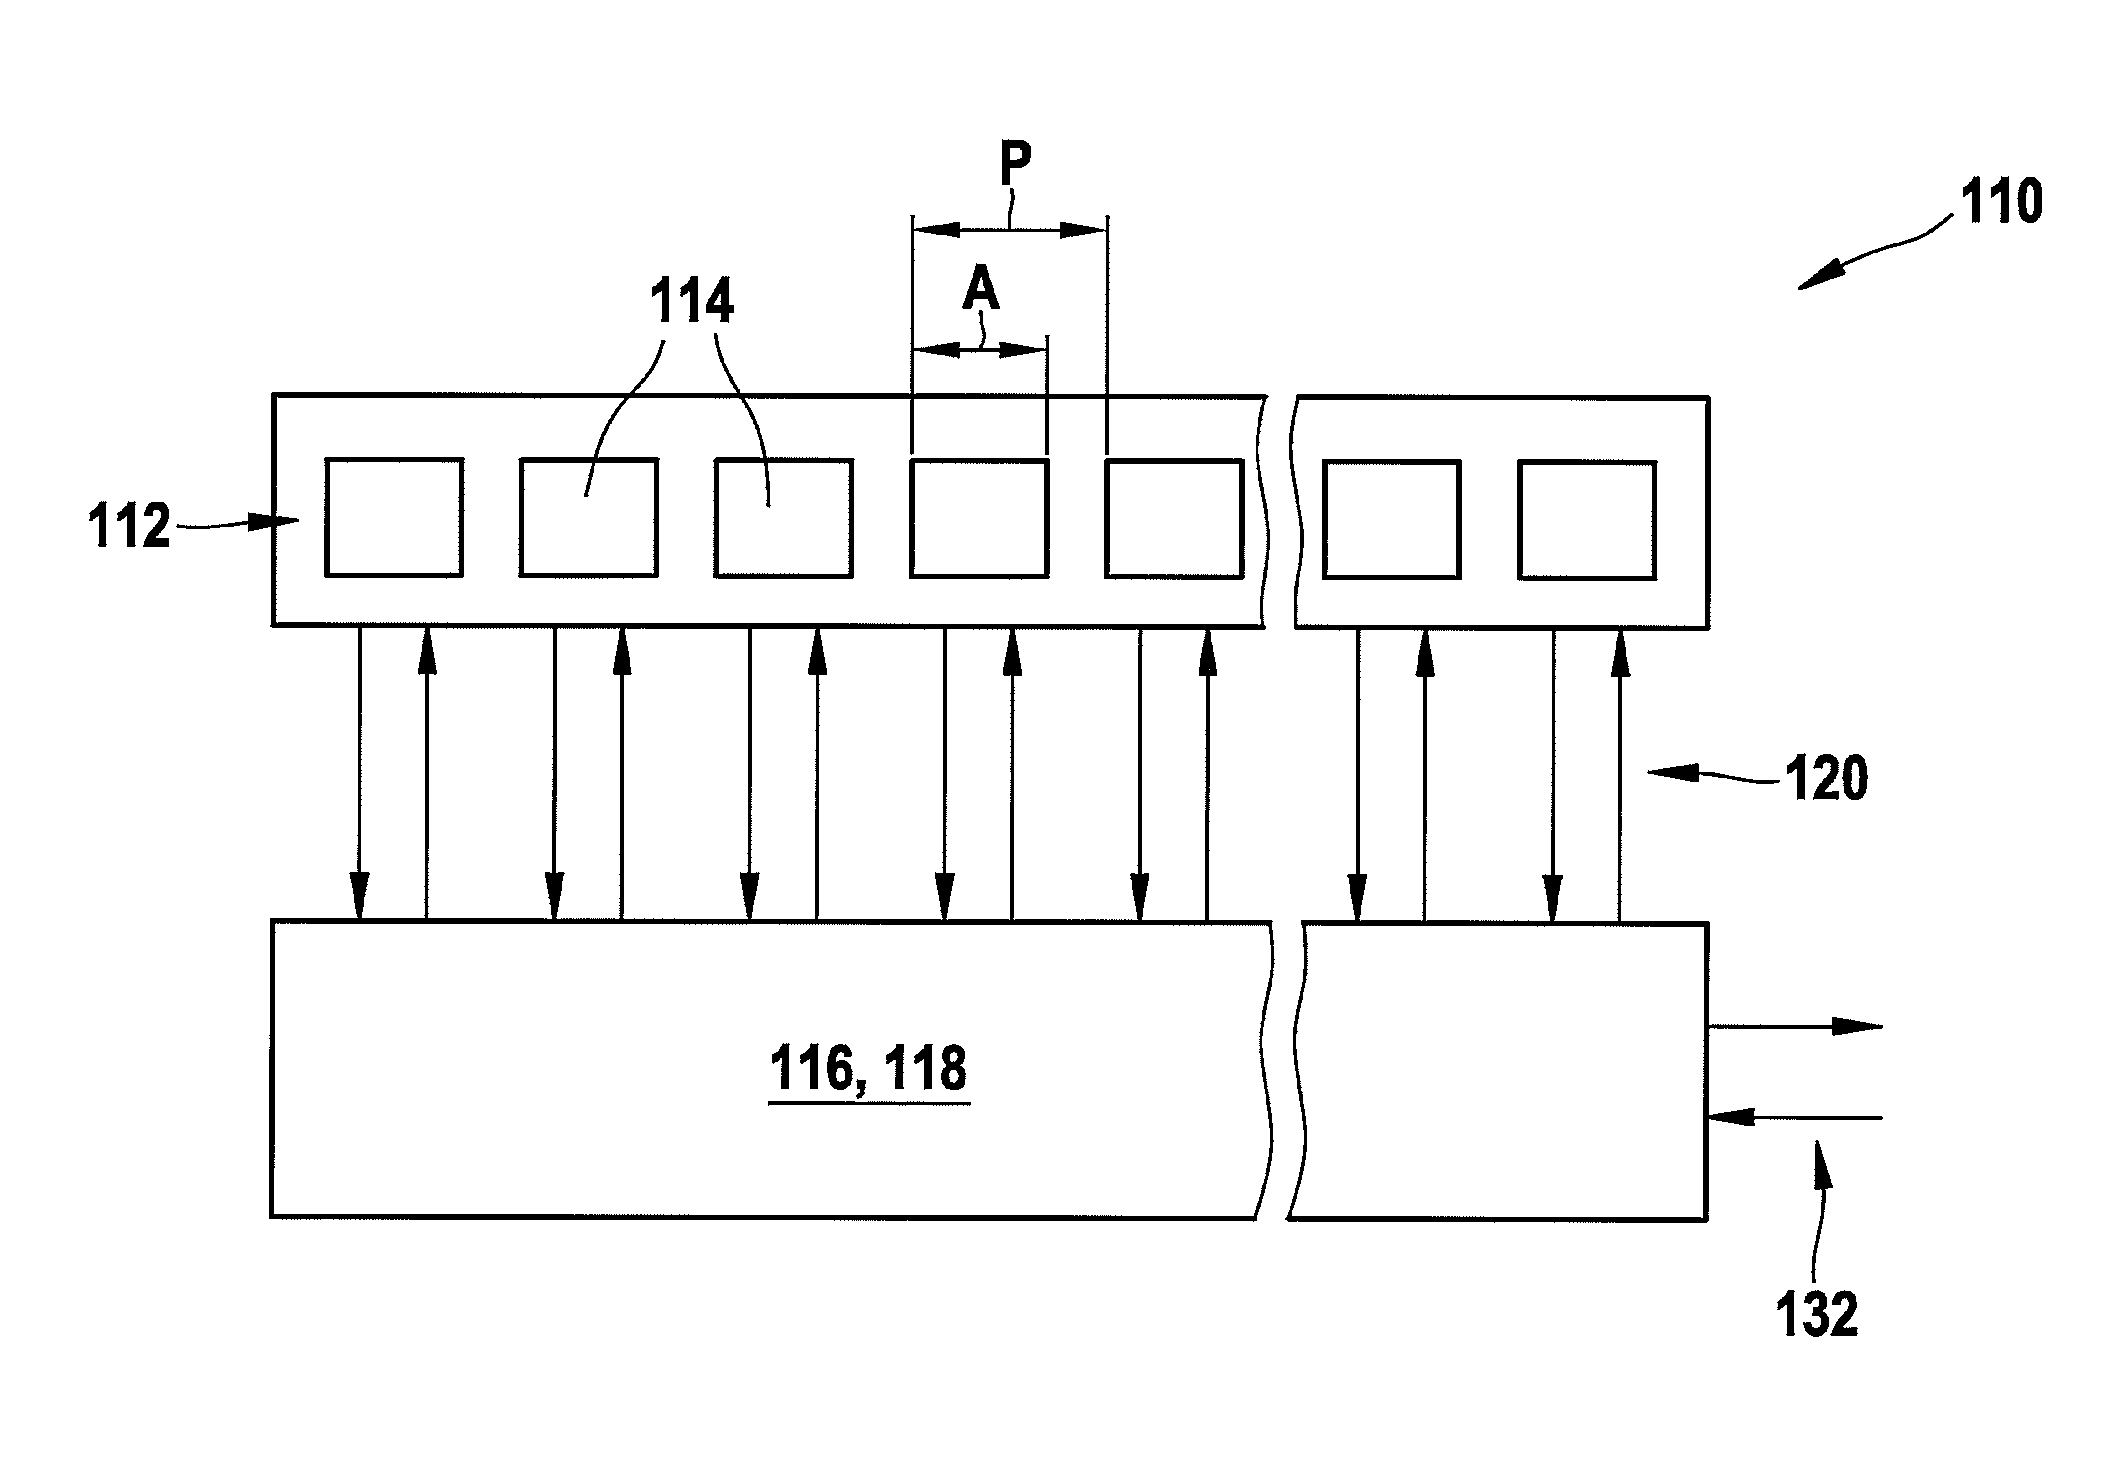 Apparatus for the detection of light in a scanning microscope